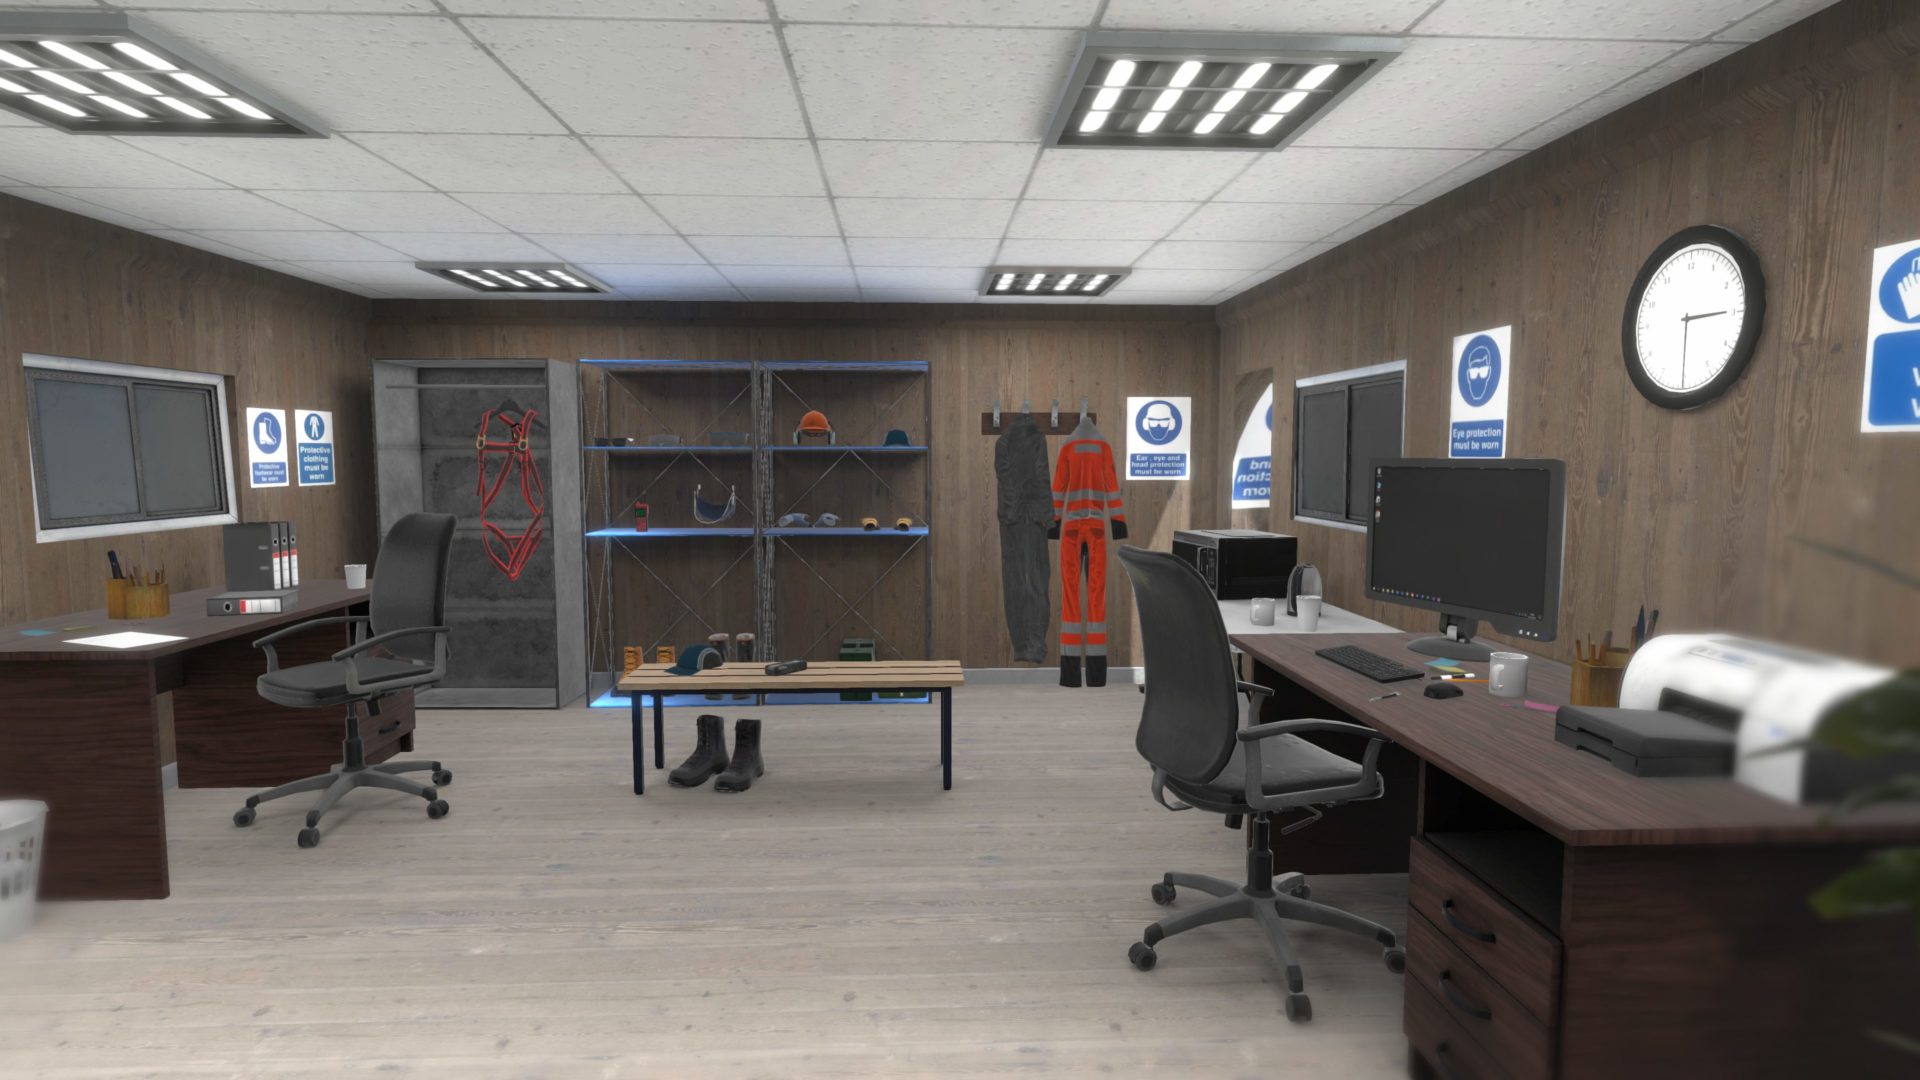 virtual environment of an office with two desks and PPE clothing and equipment